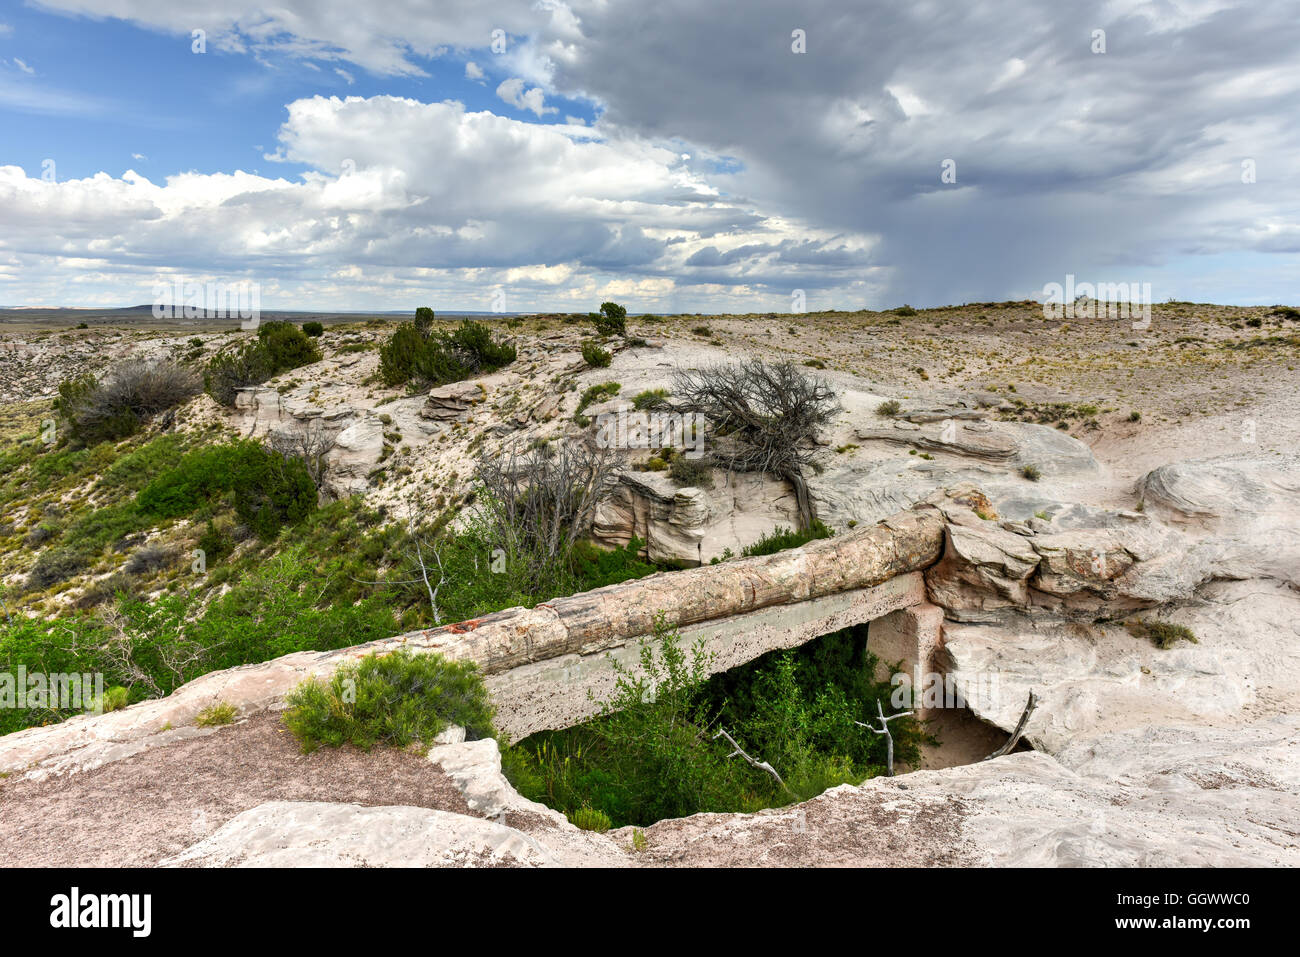 Agate Bridge in Petrified Forest National Park. It is a petrified log that spans a sandstone wash. Stock Photo